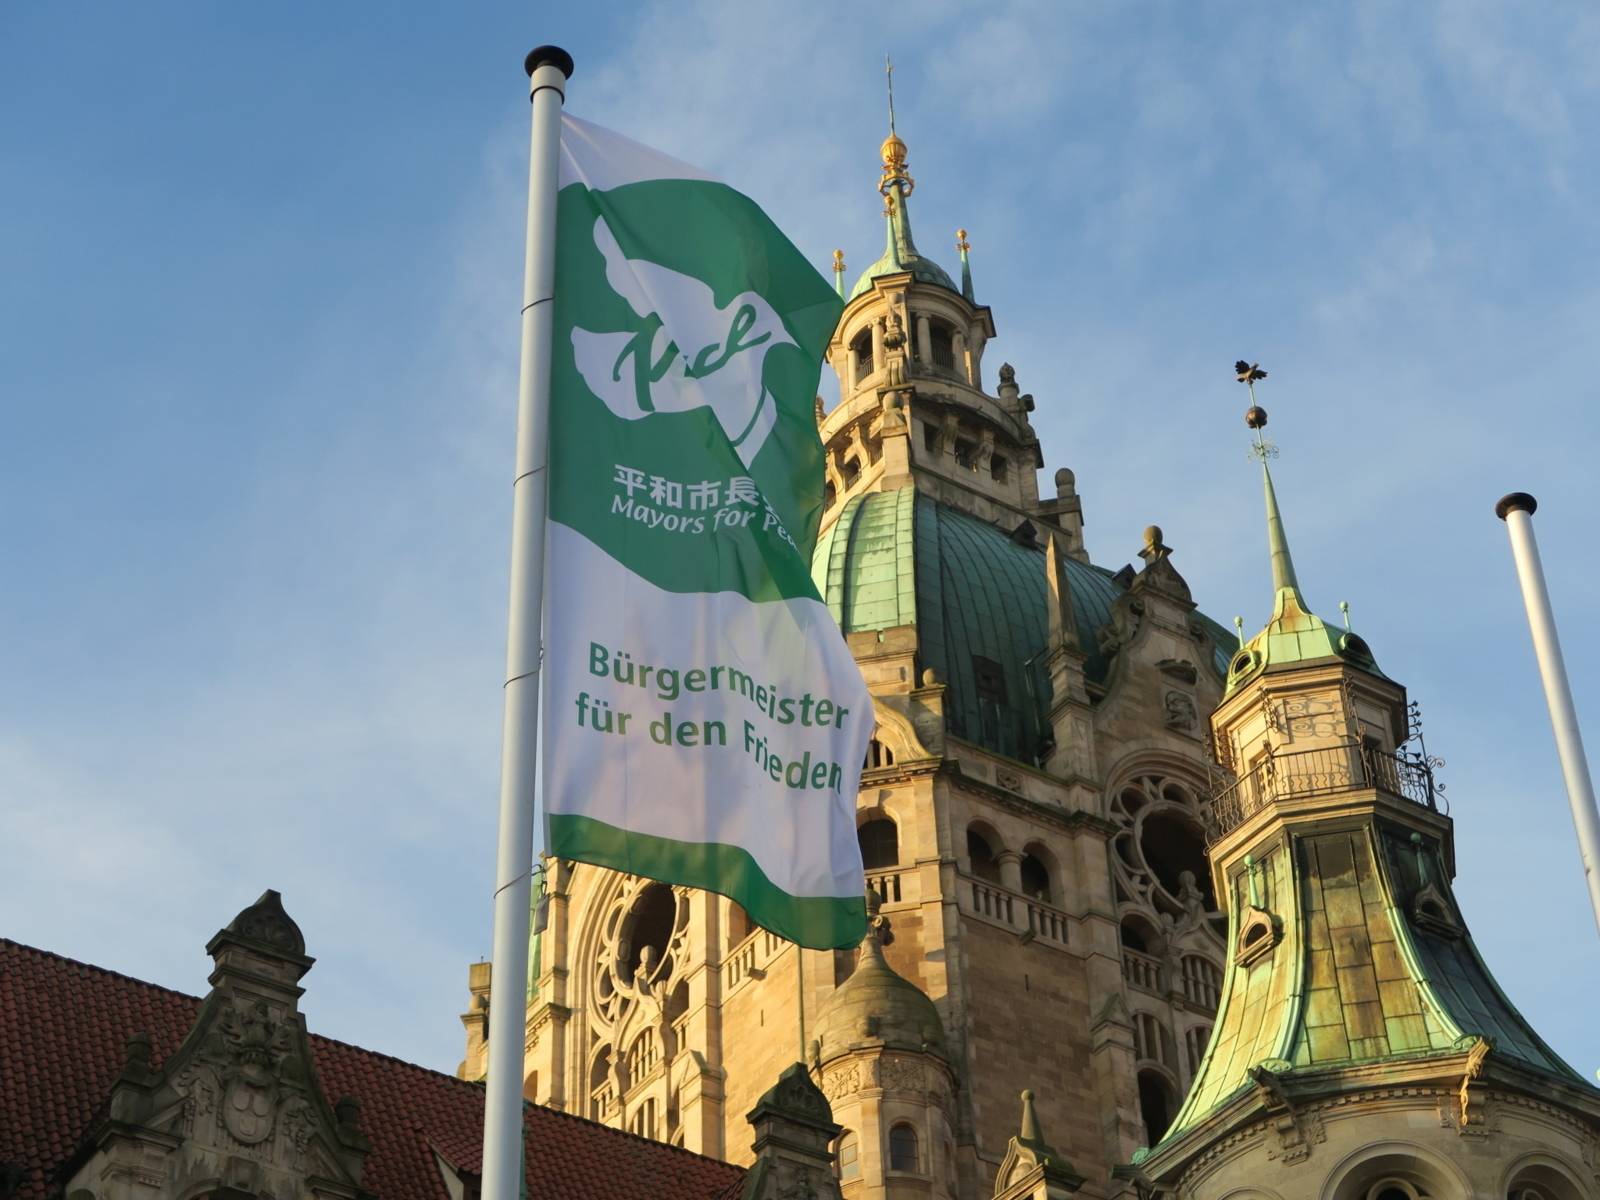 Mayors for Peace Flagge weht vor Rathaus